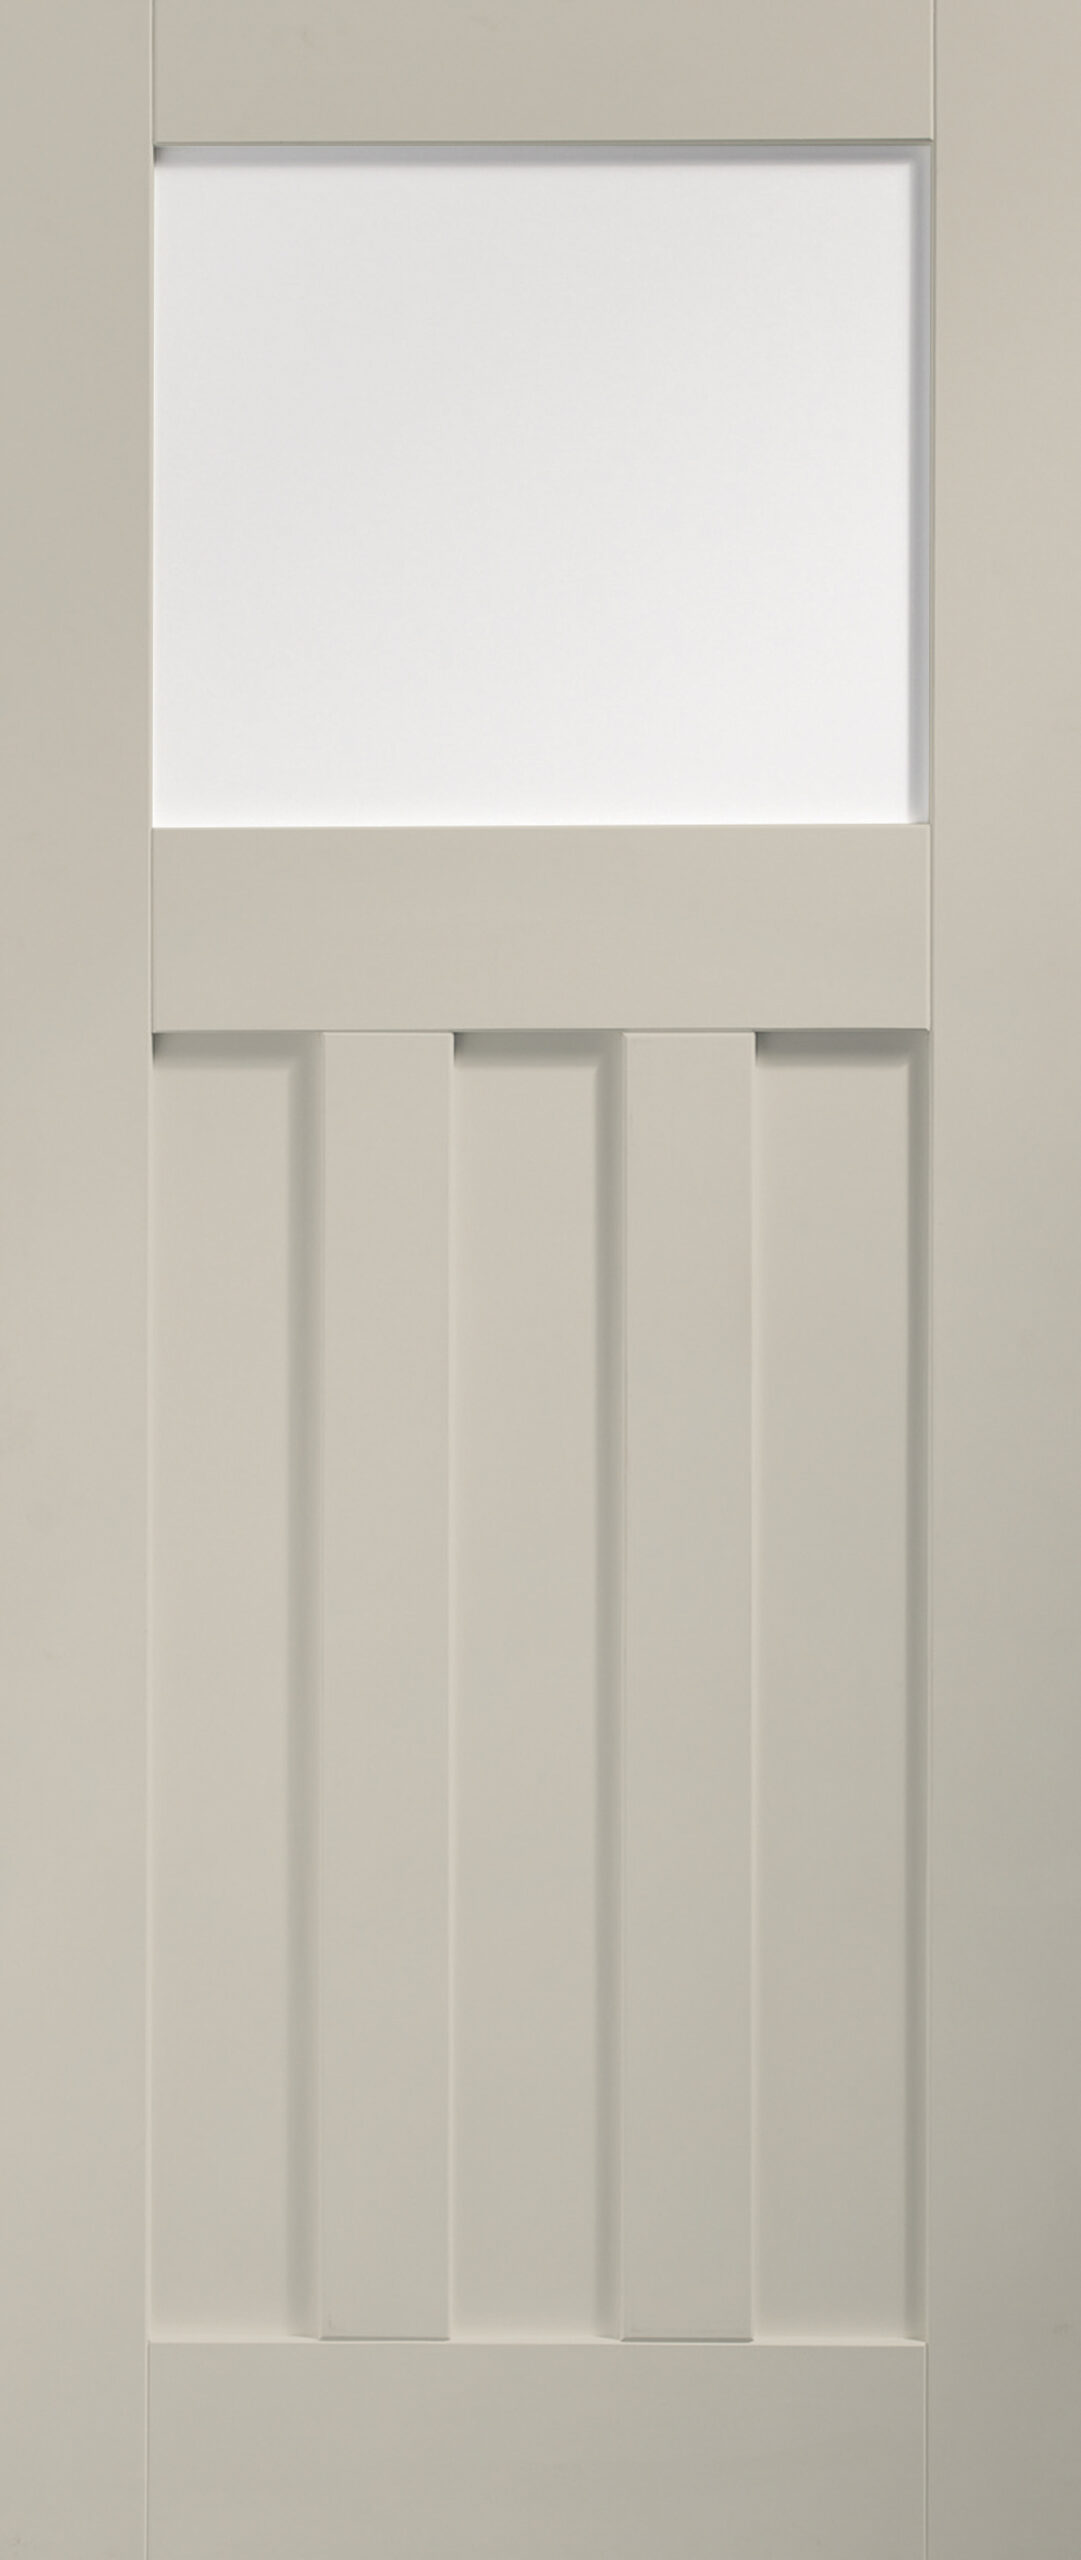 Internal White Primed DX Door with Obscure Glass – Isabella, 1981 x 762 x 35 mm